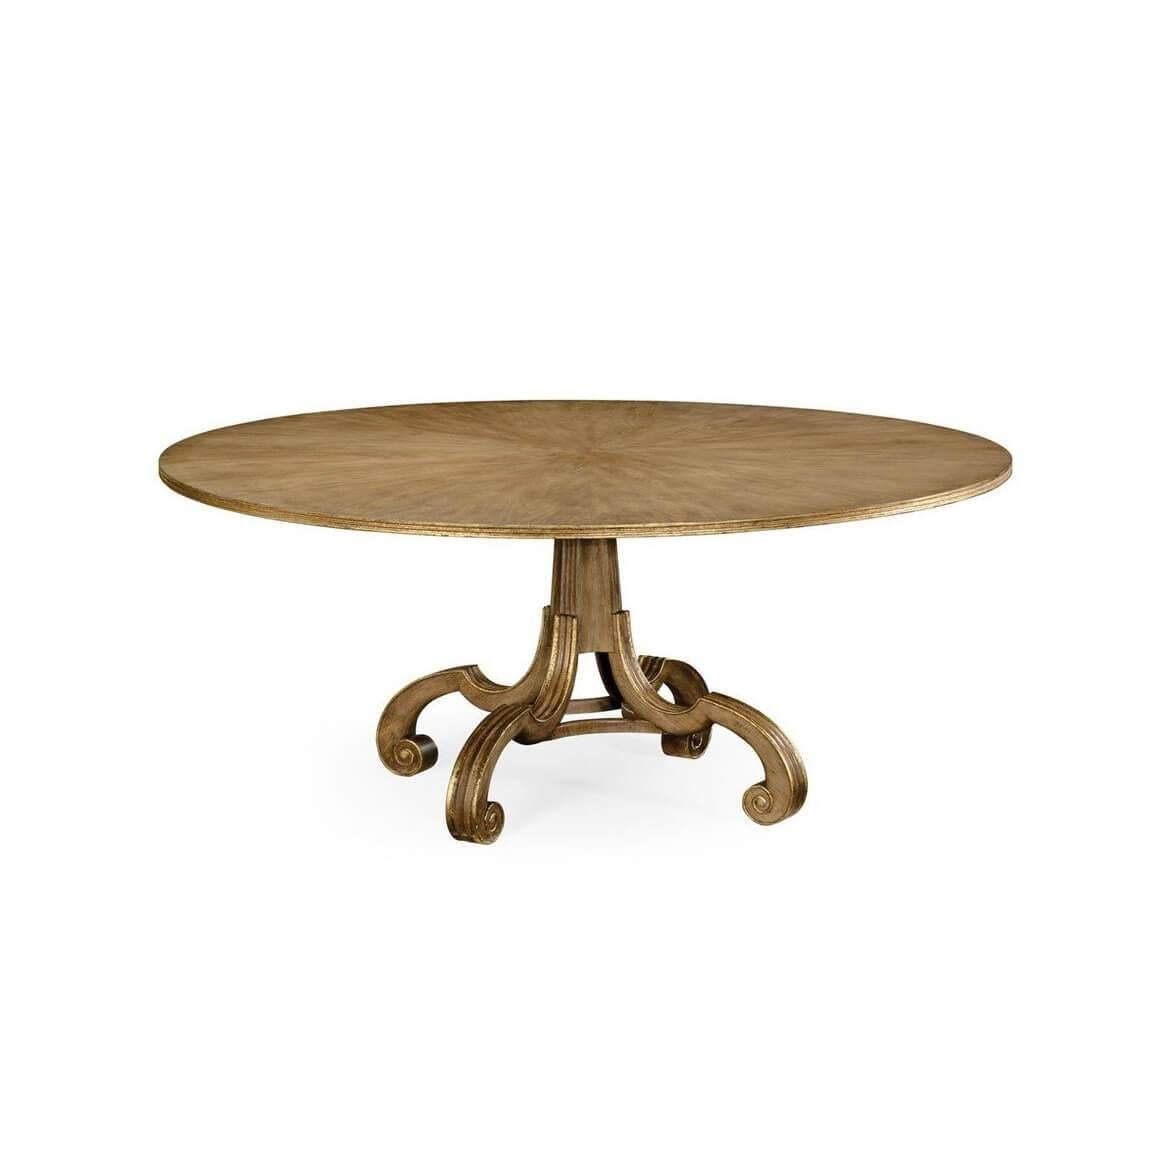 English Round Oak Dining Table In New Condition For Sale In Westwood, NJ